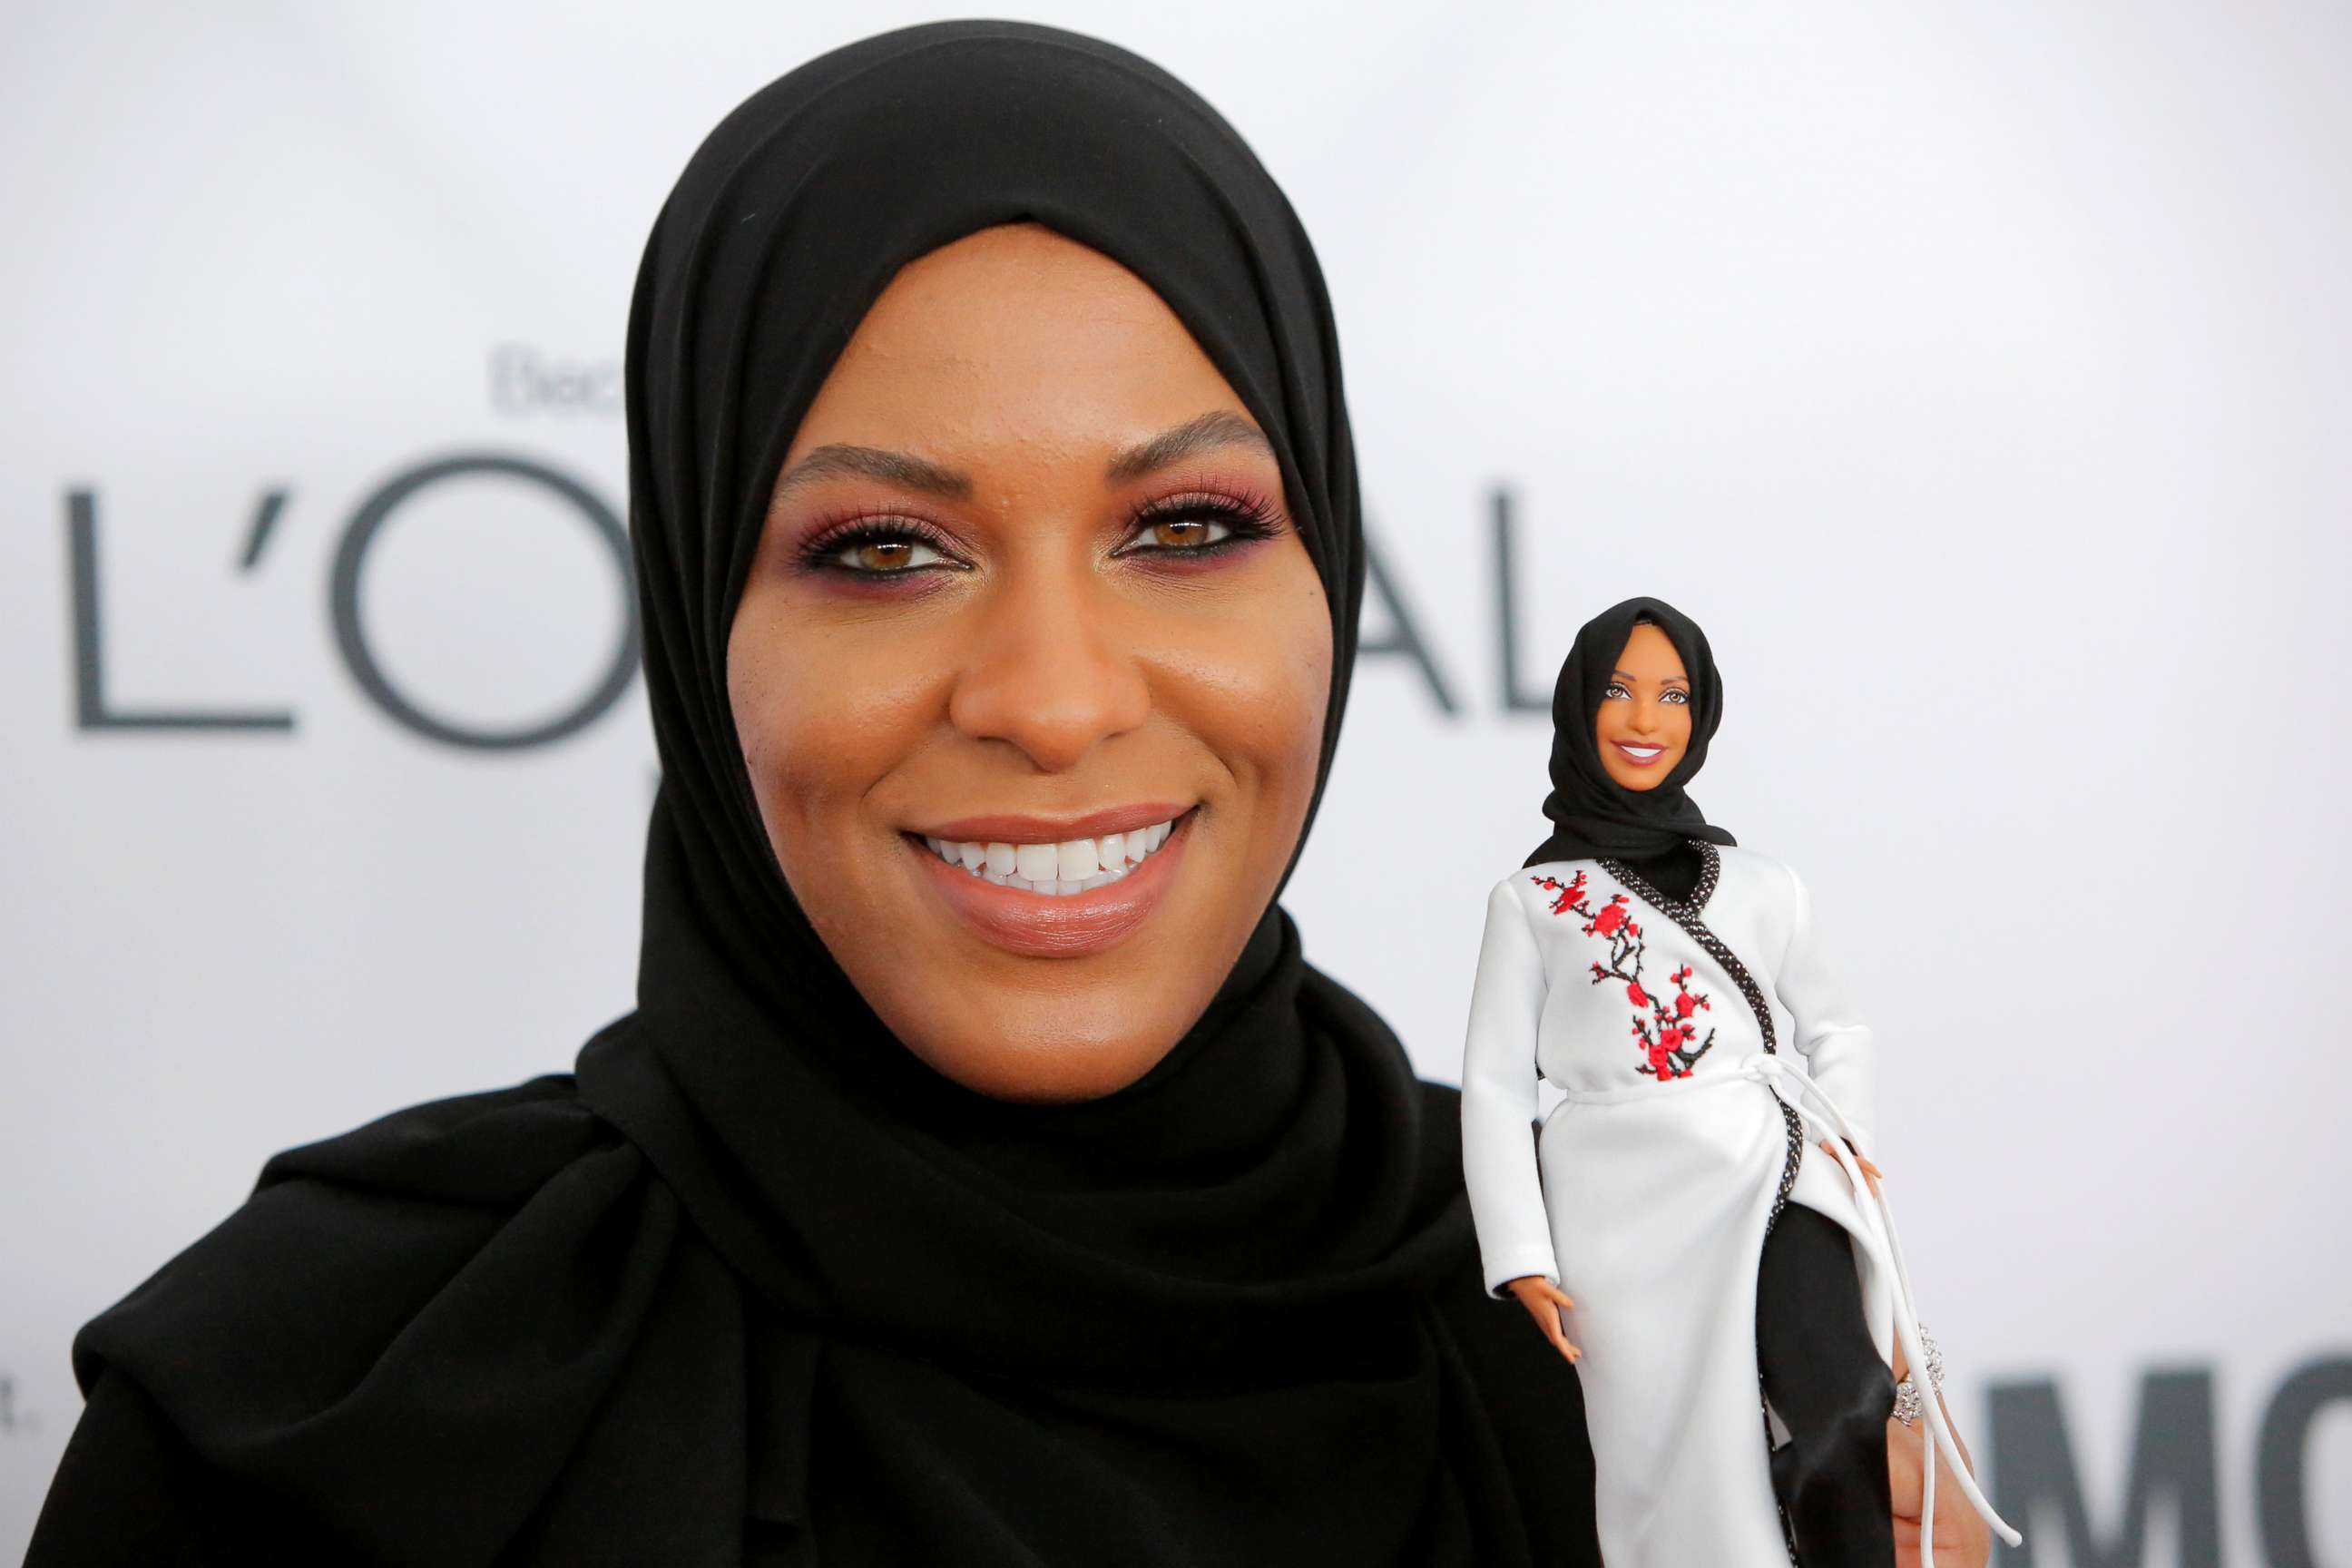 PHOTO: Olympic fencer Ibtihaj Muhammad holds a Barbie doll made in her likeness as she attends the 2017 Glamour Women of the Year Awards at the Kings Theater in Brooklyn, New York, Nov. 13, 2017. 